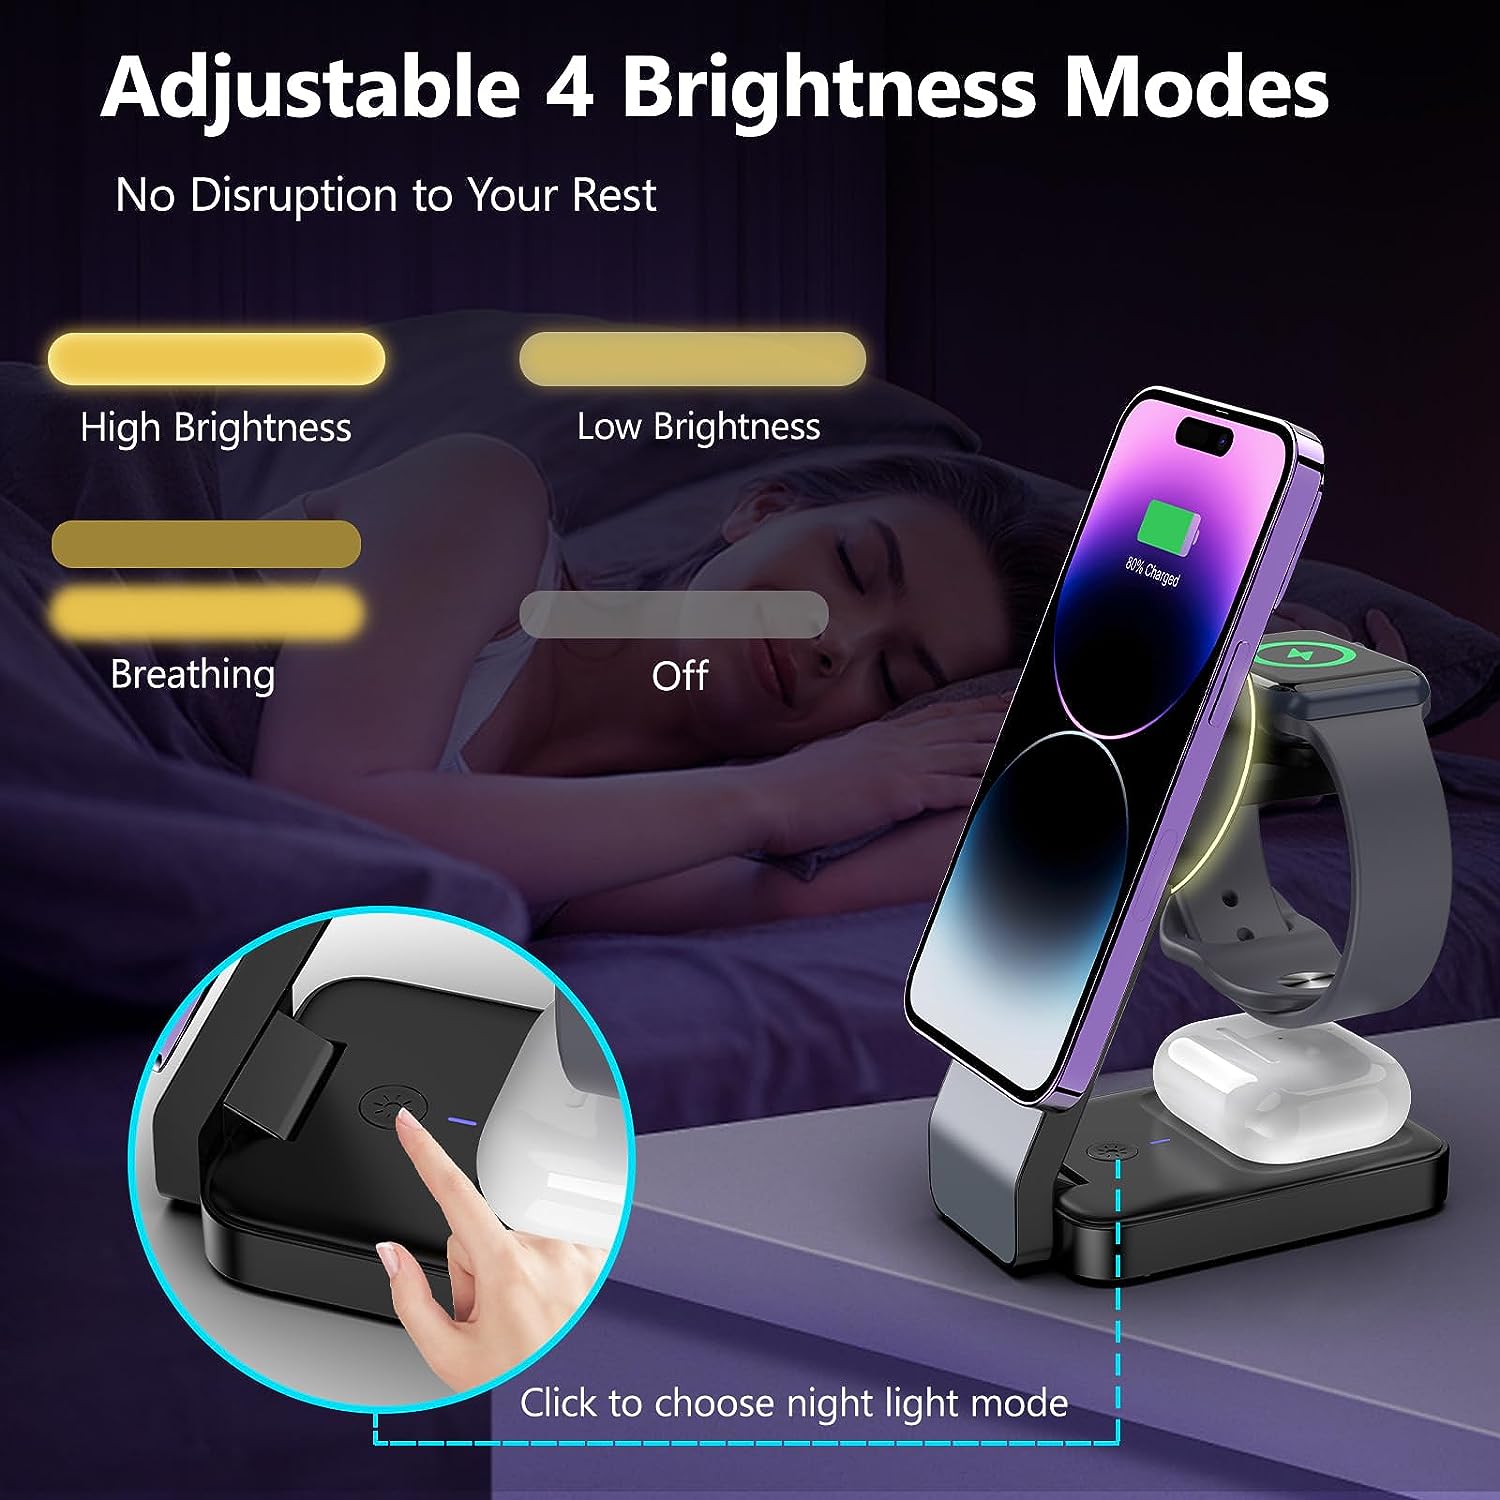 3 in 1 Foldable Wireless Charging Station